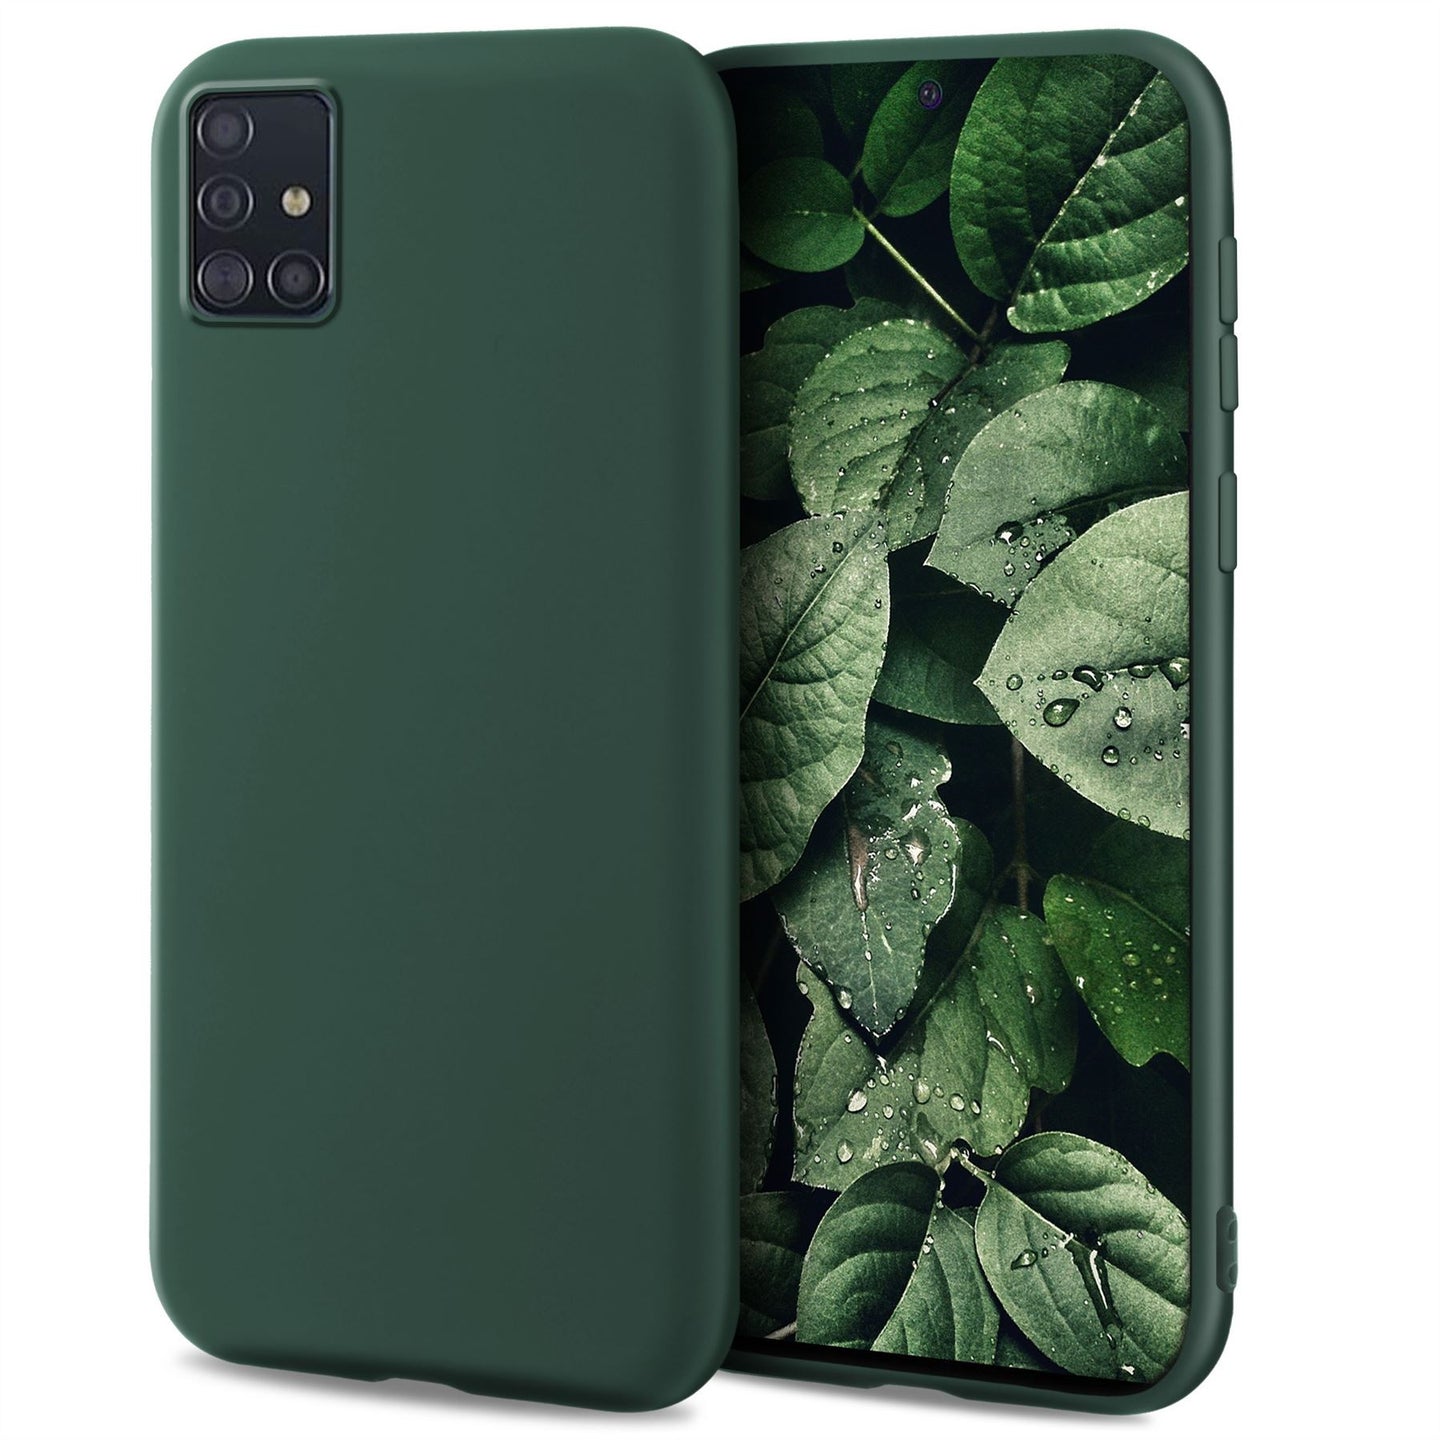 Moozy Minimalist Series Silicone Case for Samsung A71, Midnight Green - Matte Finish Slim Soft TPU Cover